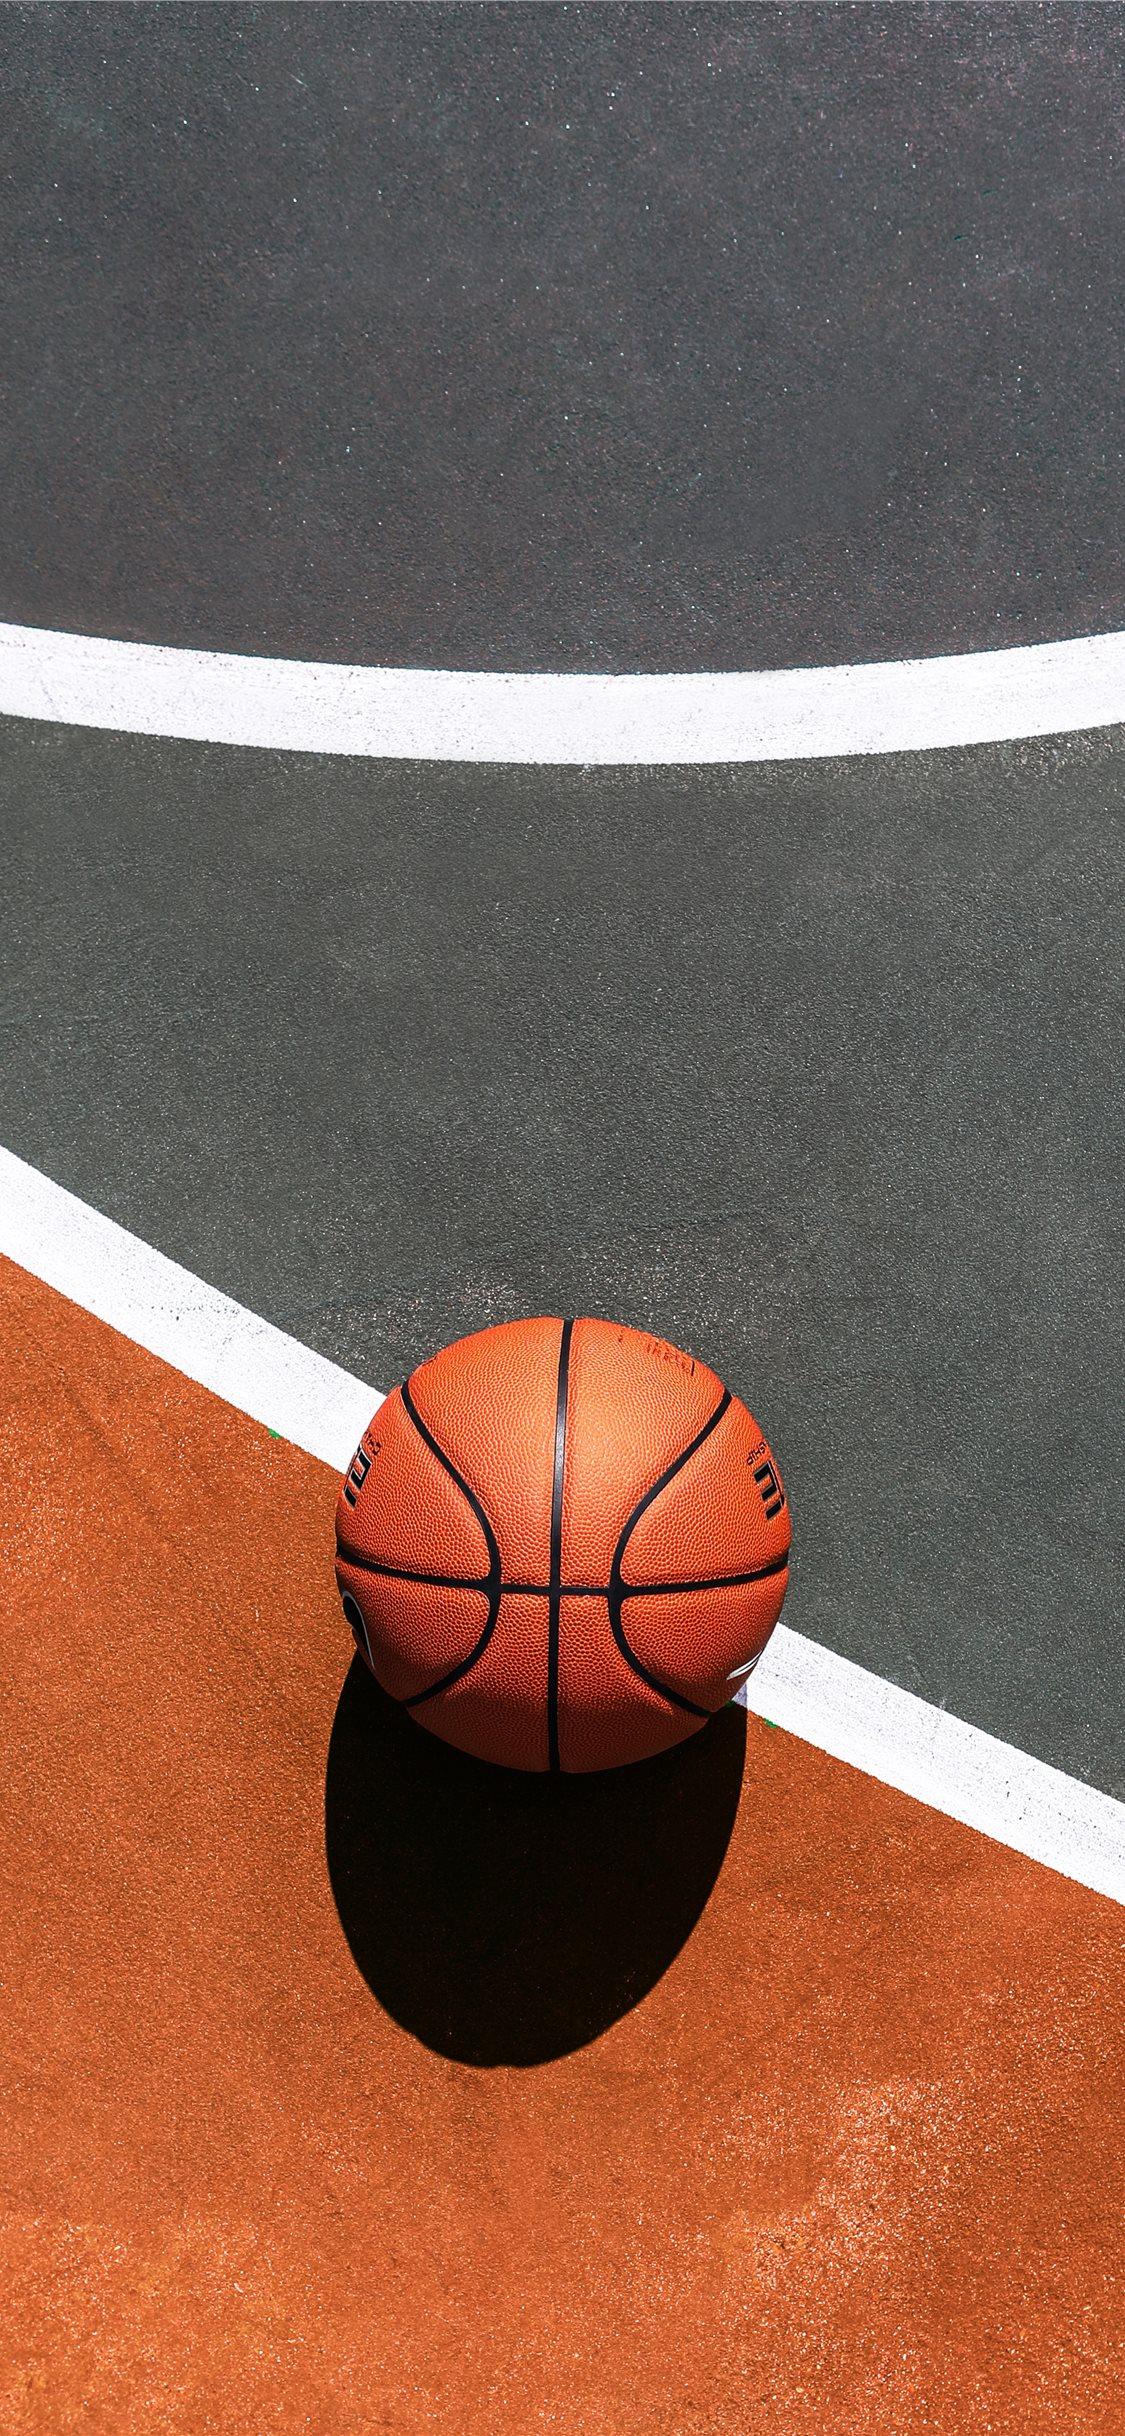 Basketball Iphone Wallpapers